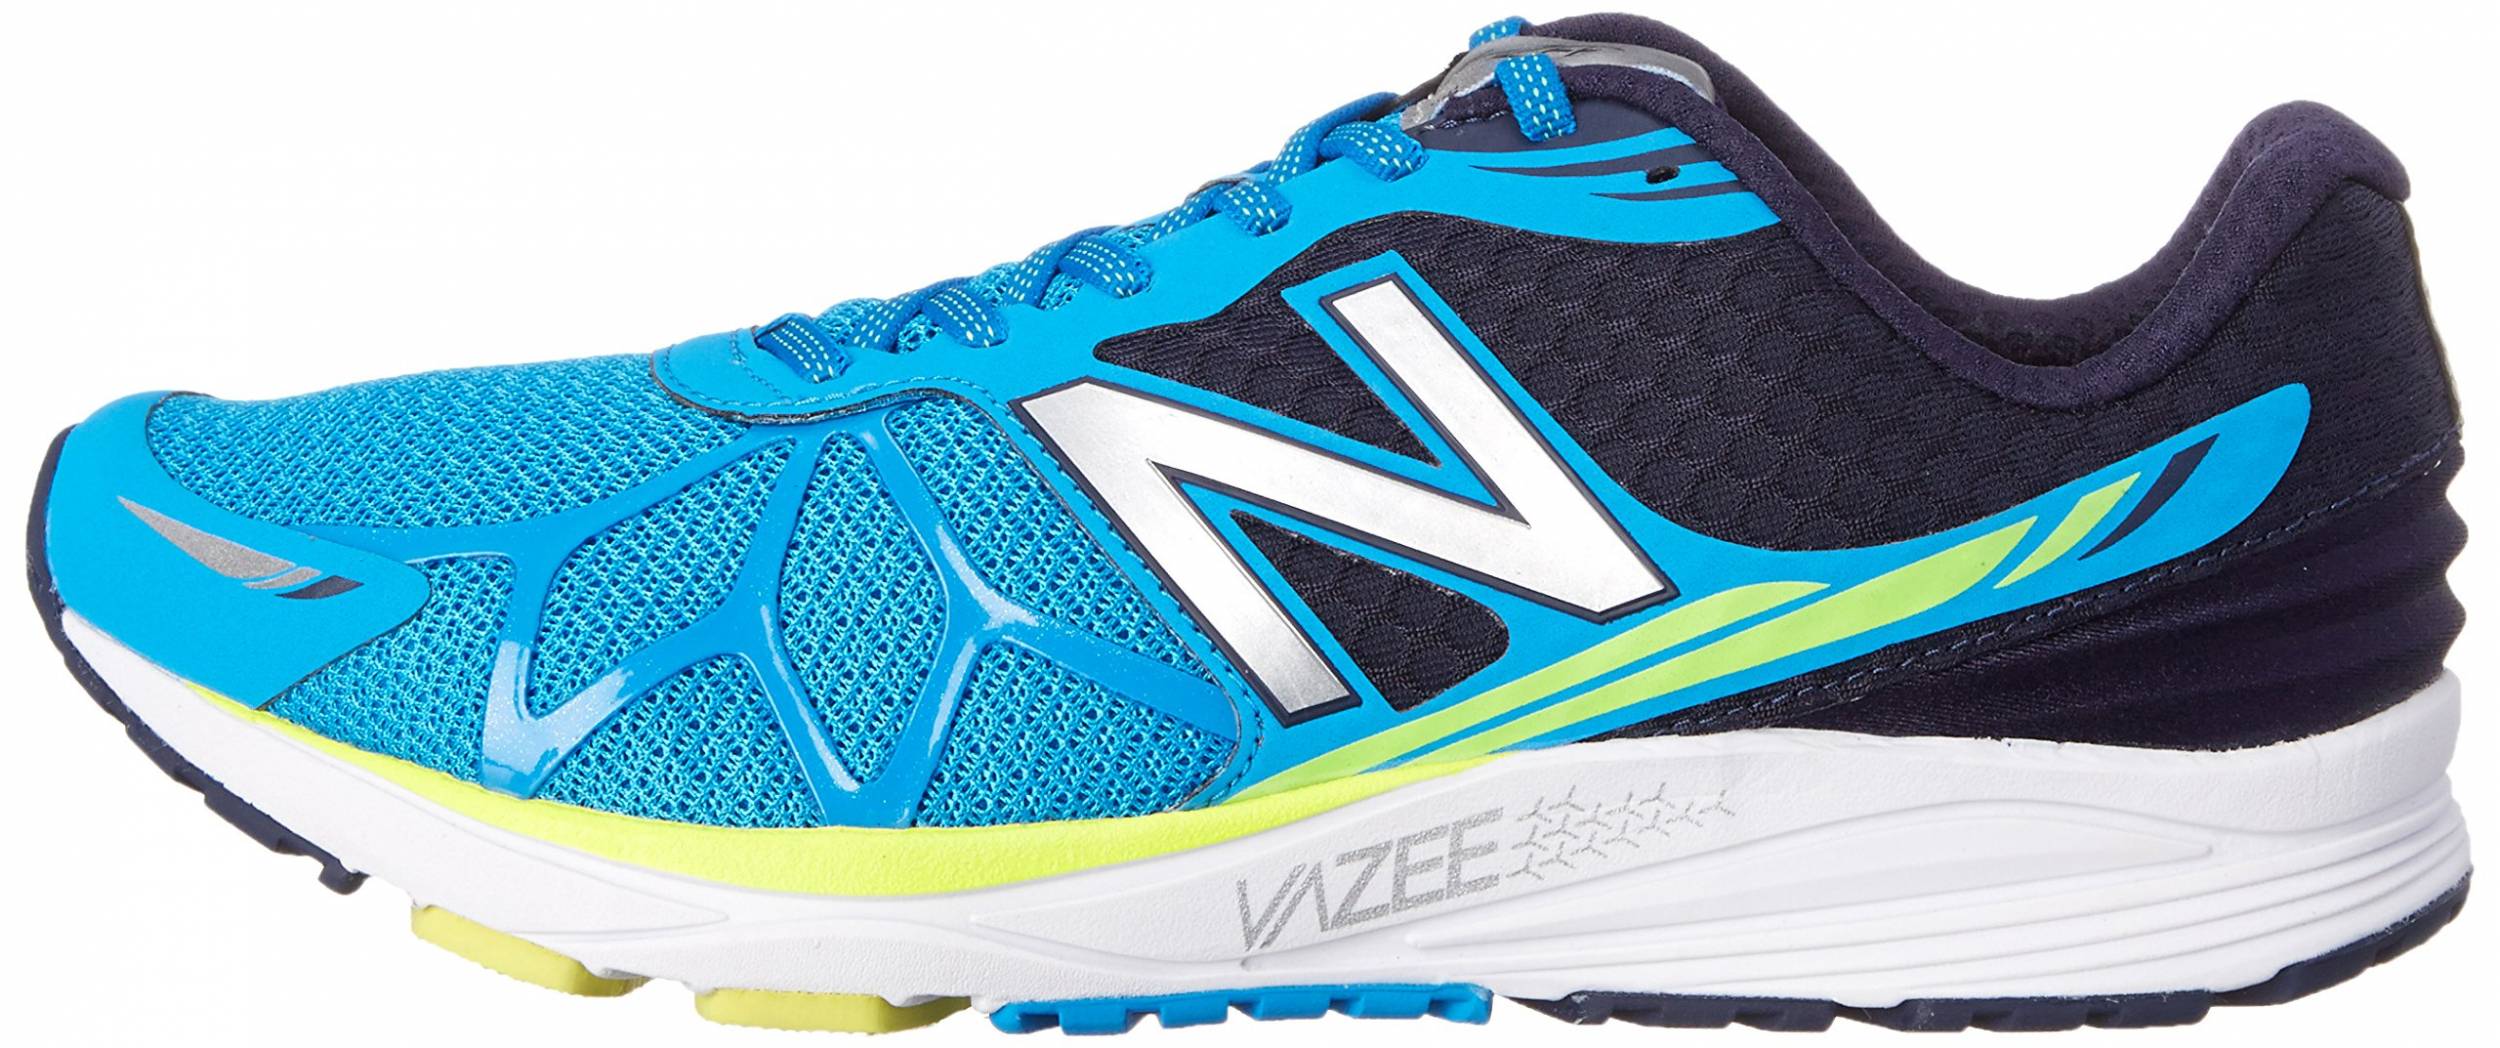 11 Reasons to/NOT to Buy New Balance Vazee Pace (Sep 2021) | RunRepeat